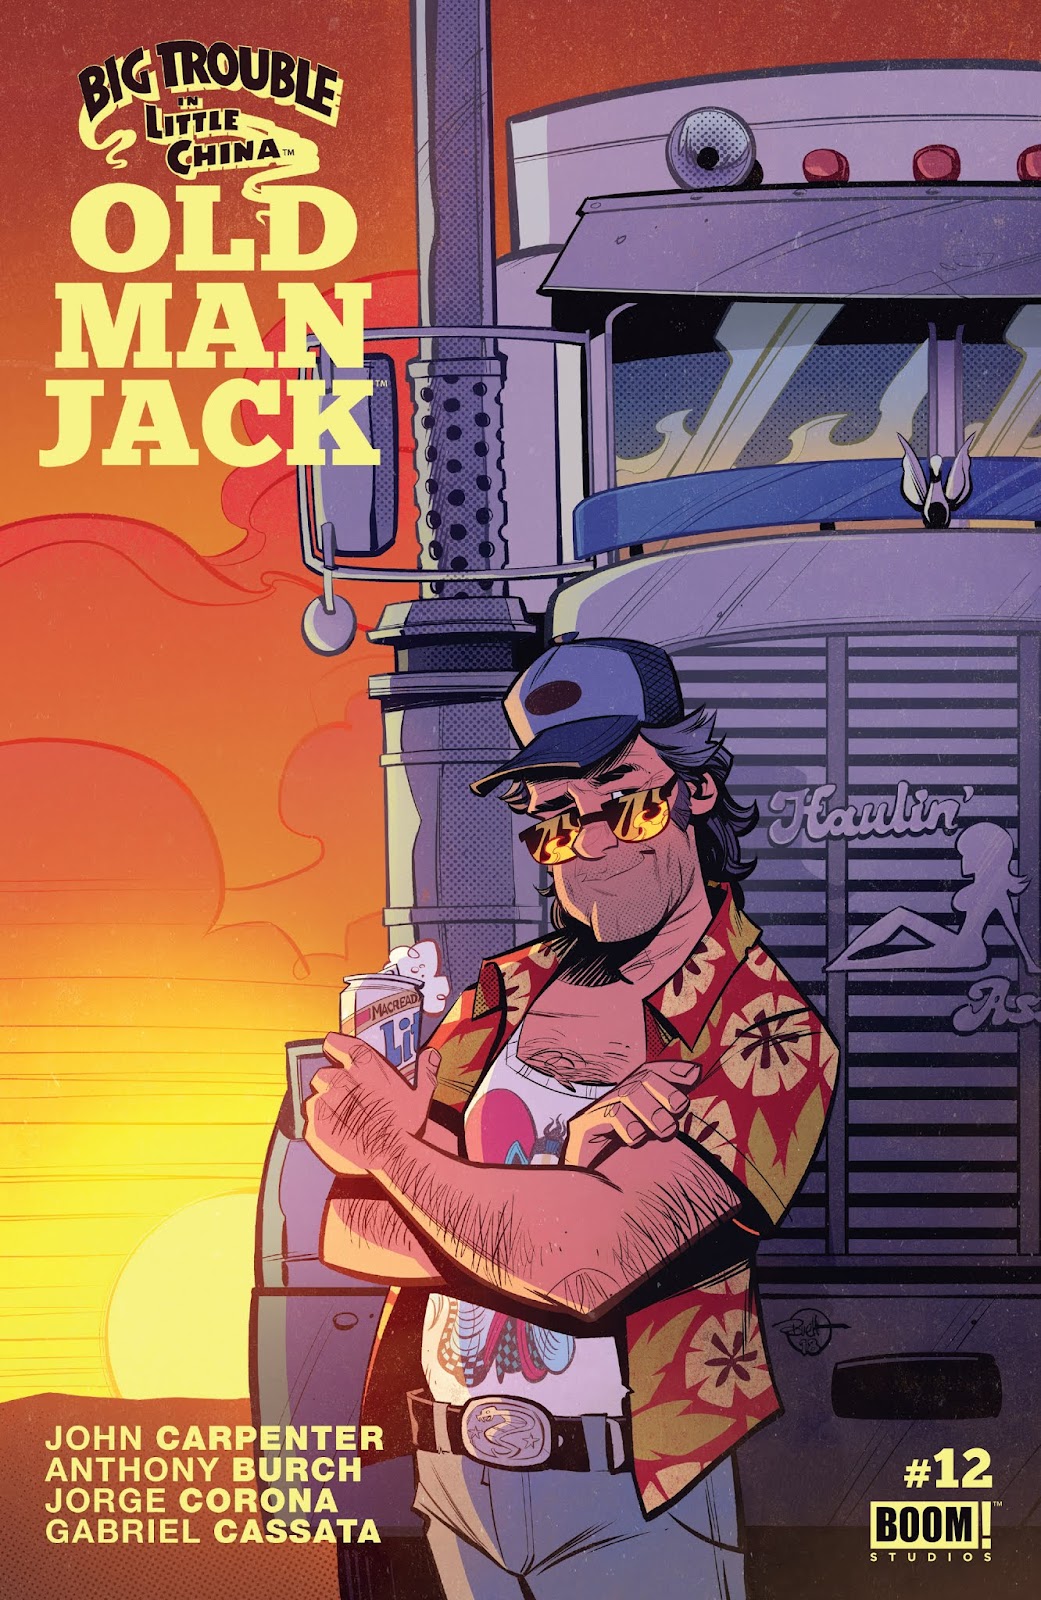 Big Trouble in Little China: Old Man Jack issue 12 - Page 1